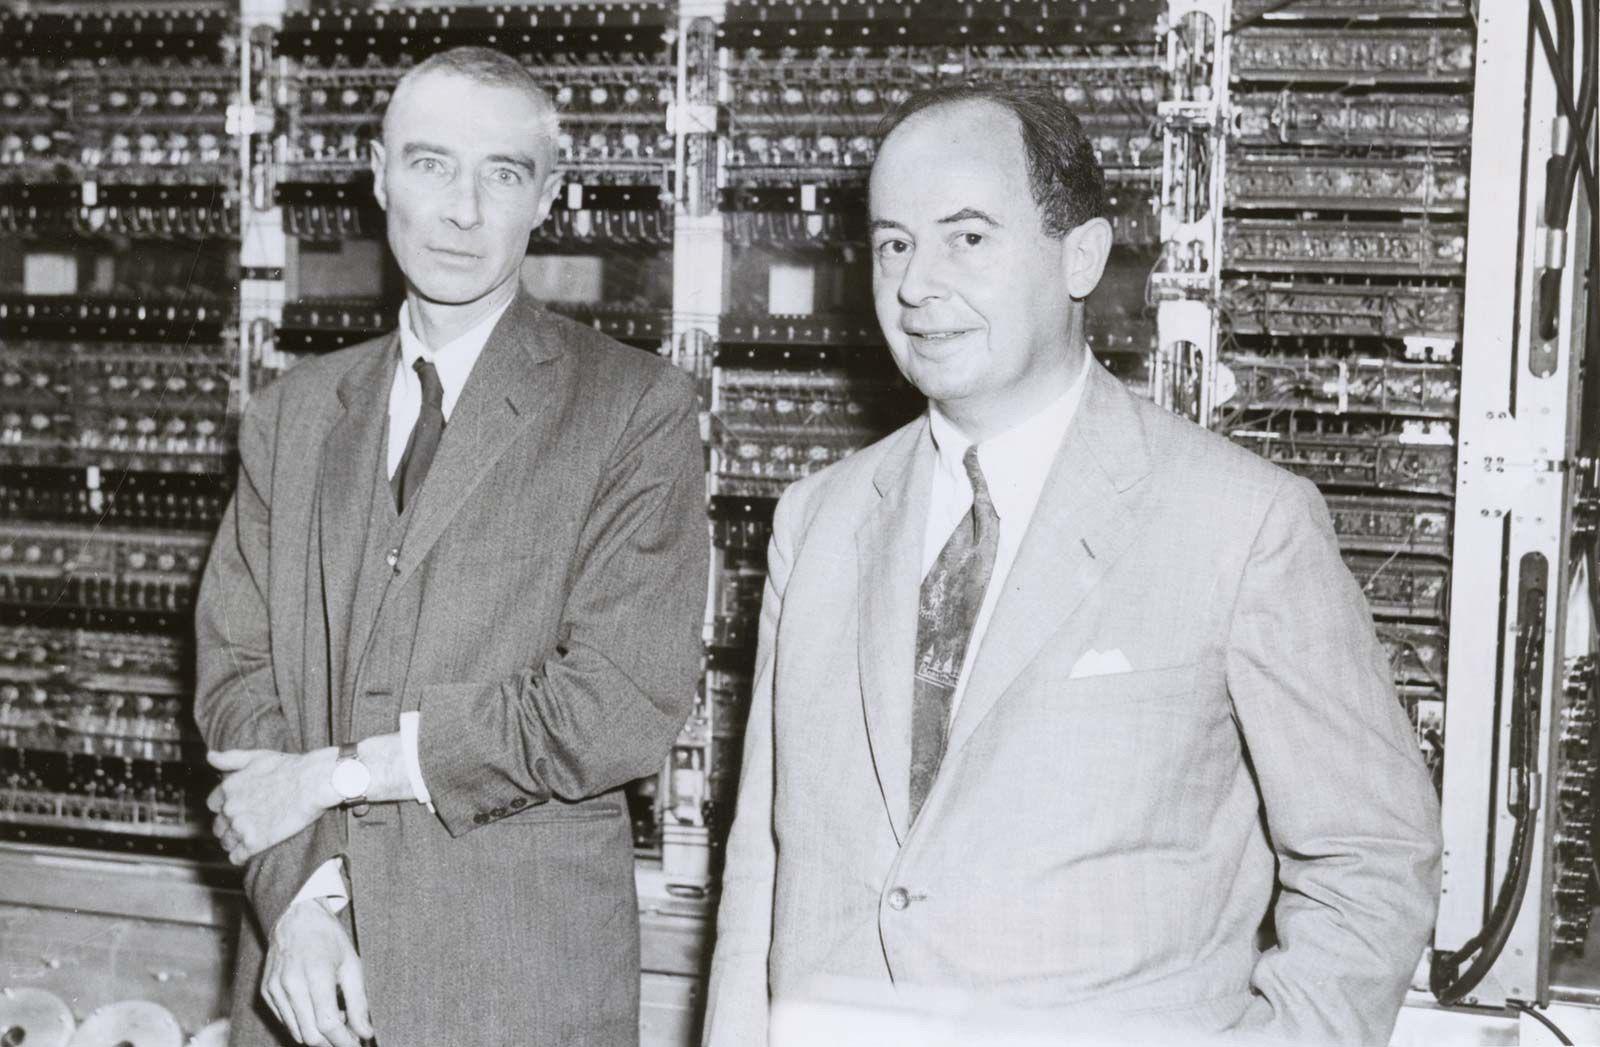 Von Neumann and Oppenheimer together in-front of one of the computing machines used on the hydrogen bomb project. Von Neumann could do calculations in his head faster than these early computers and would sometimes face off against them in competitions meant to entertain the other people in the labs.